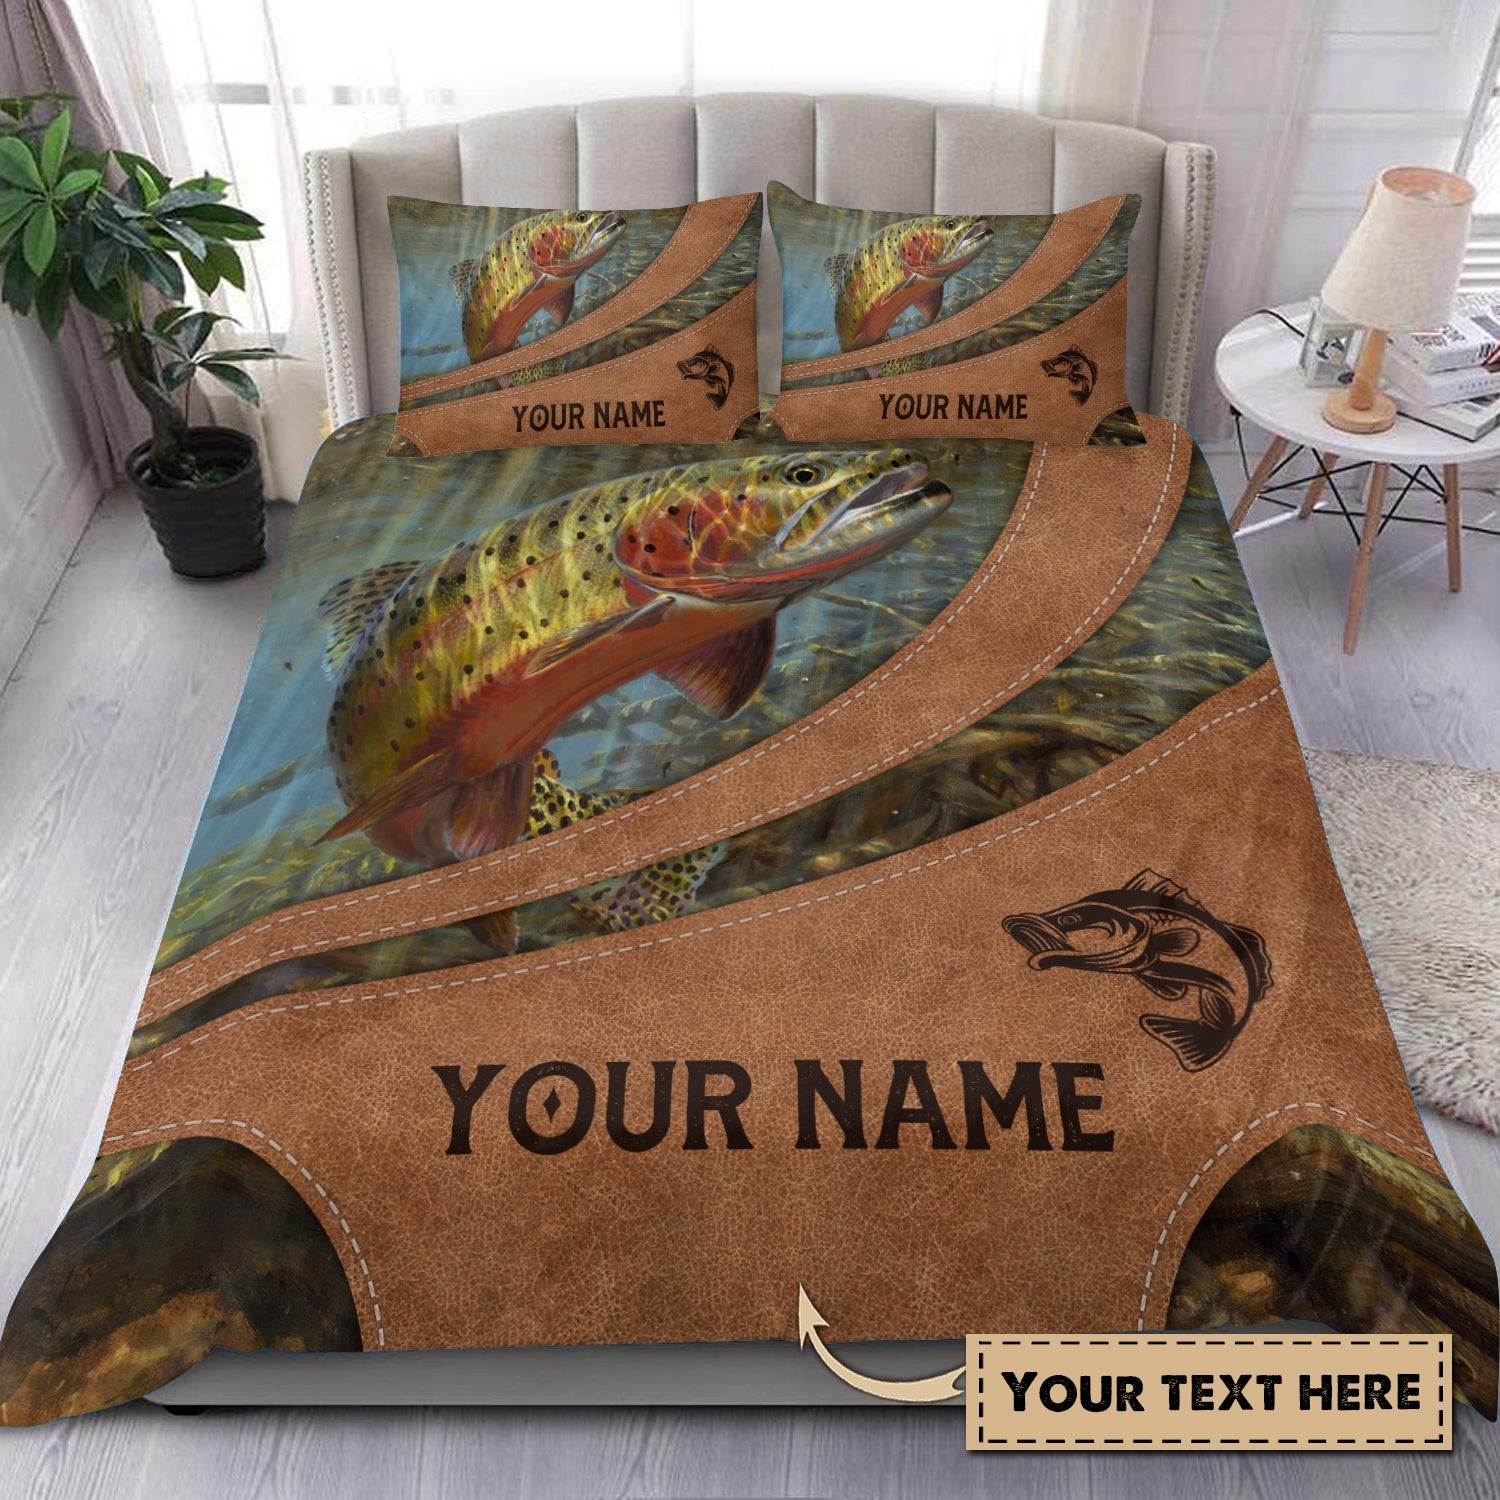 Personalized Fishing Bedding Set, Personalized Gift for Fishing Lovers50 Cornbee